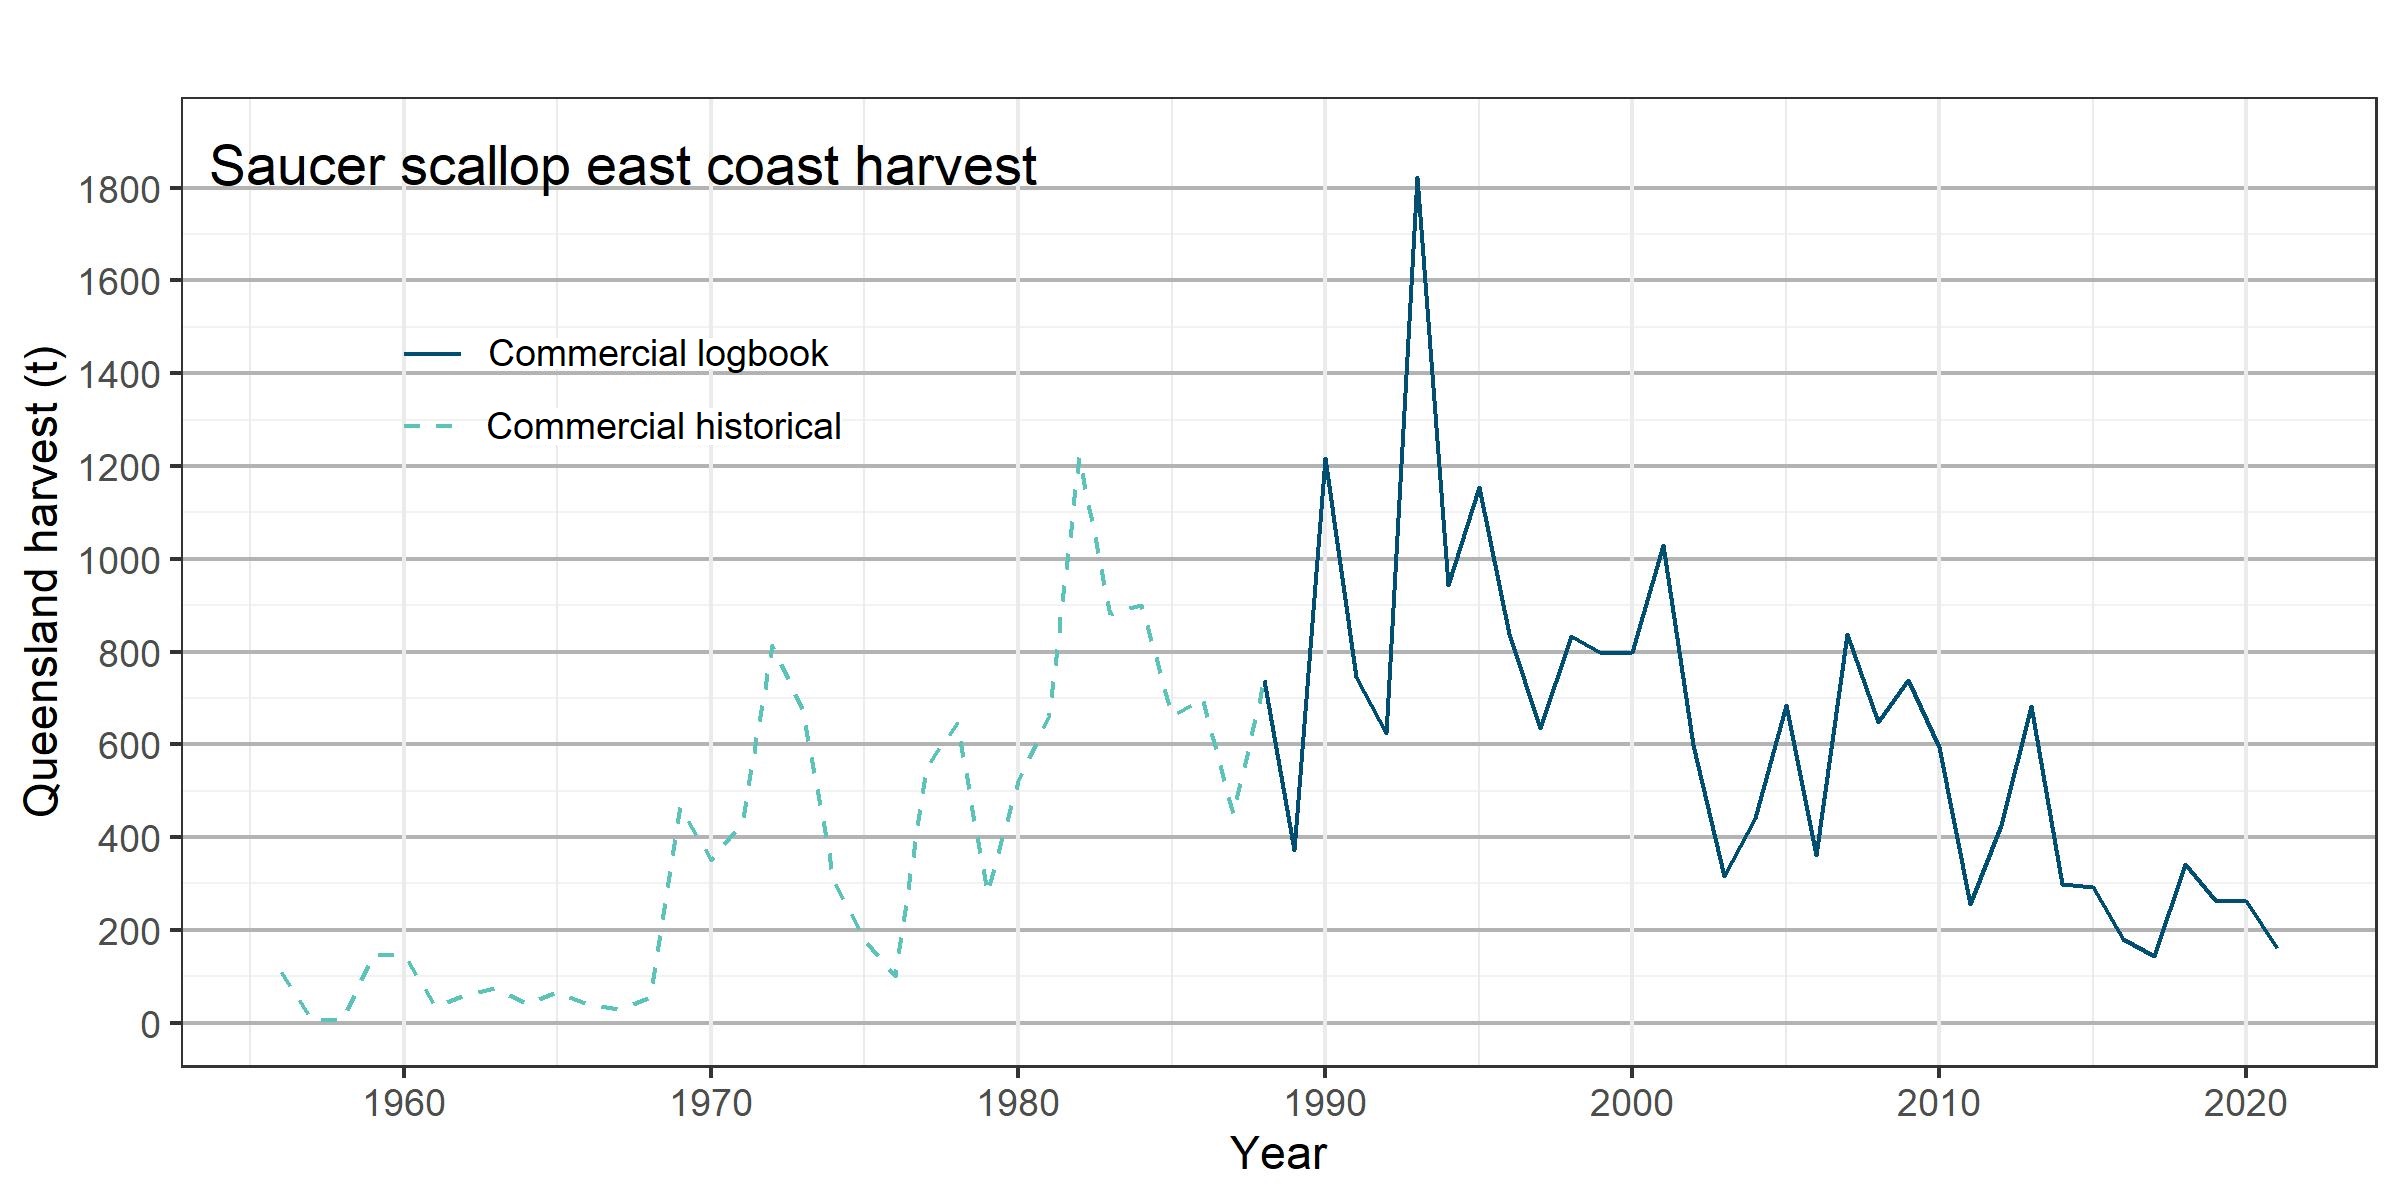 The chart presents the Ballot’s saucer scallop harvest taken by commercial fishers from 1956 to 2021. The commercial harvest is from a historical source between 1956 and 1988, and from the logbook program between 1988 and 2021. 